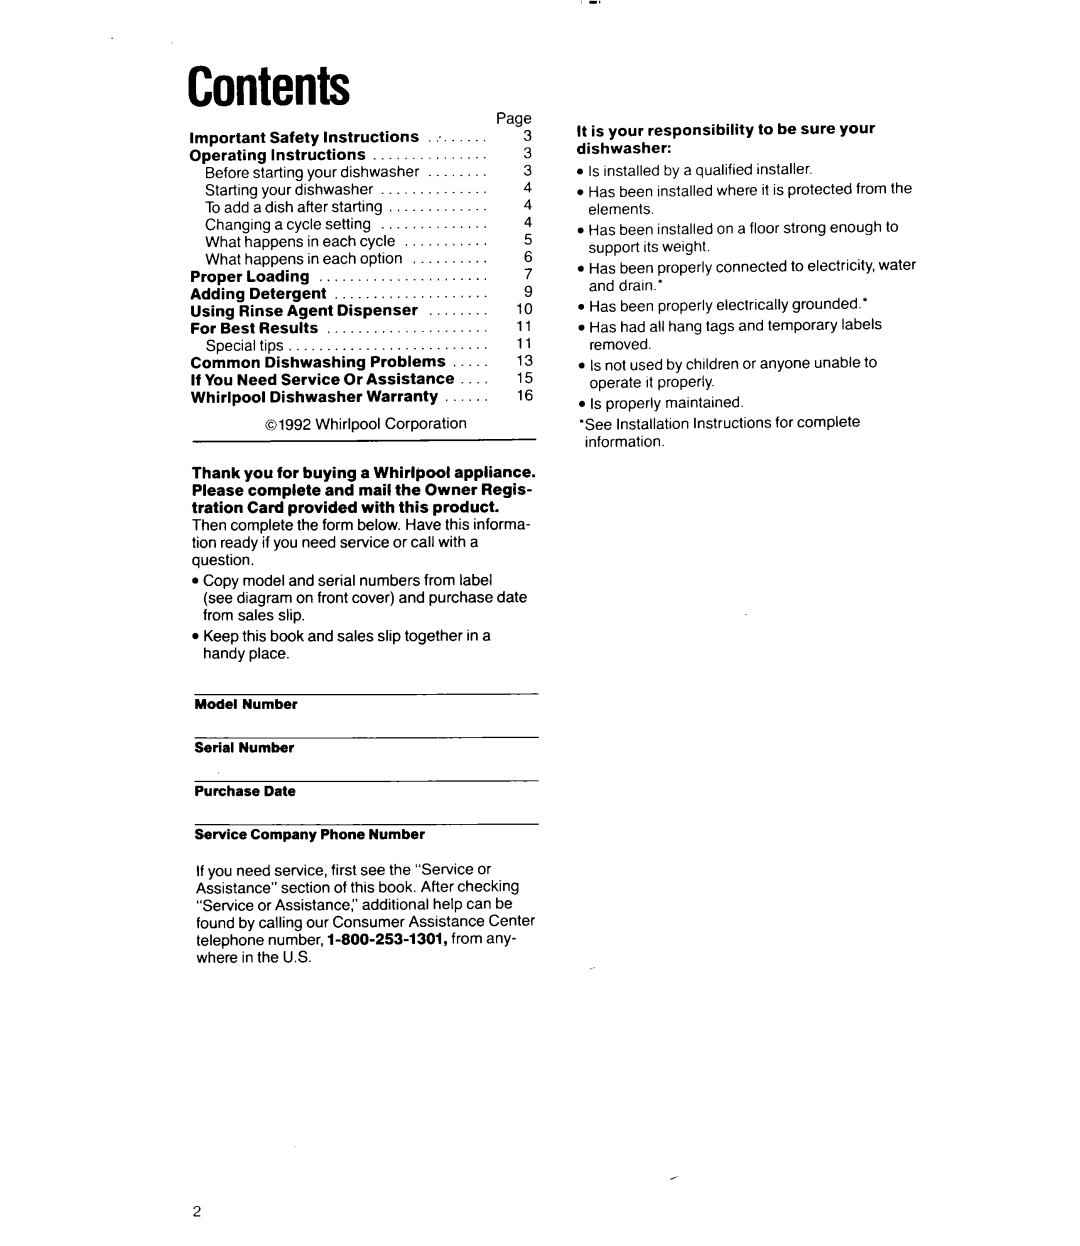 Whirlpool 8000 Series manual Contents 